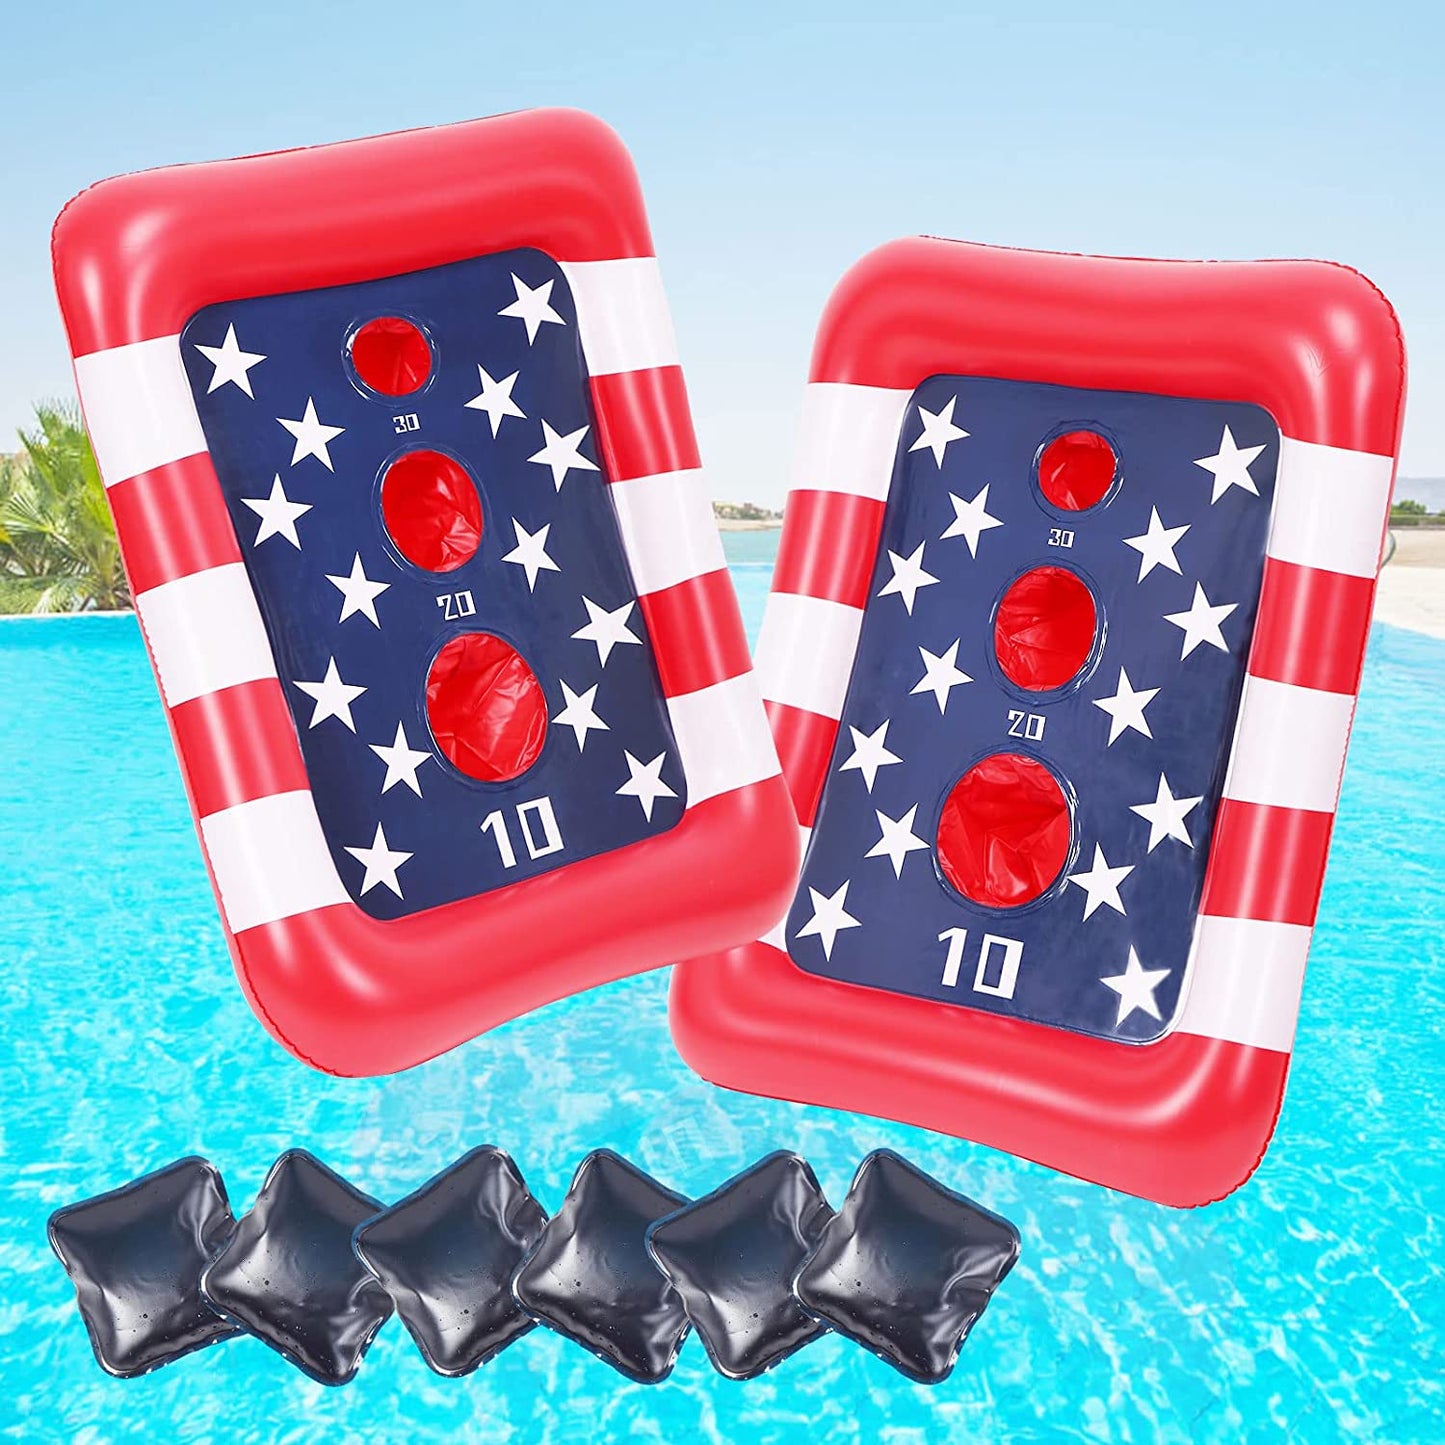  Floating Cornhole Set, American Flag Swimming Pool Party Supplies Pool Accessories, Summer Pool Toys for Kids Adults, 2pcs Float Cornhole Boards